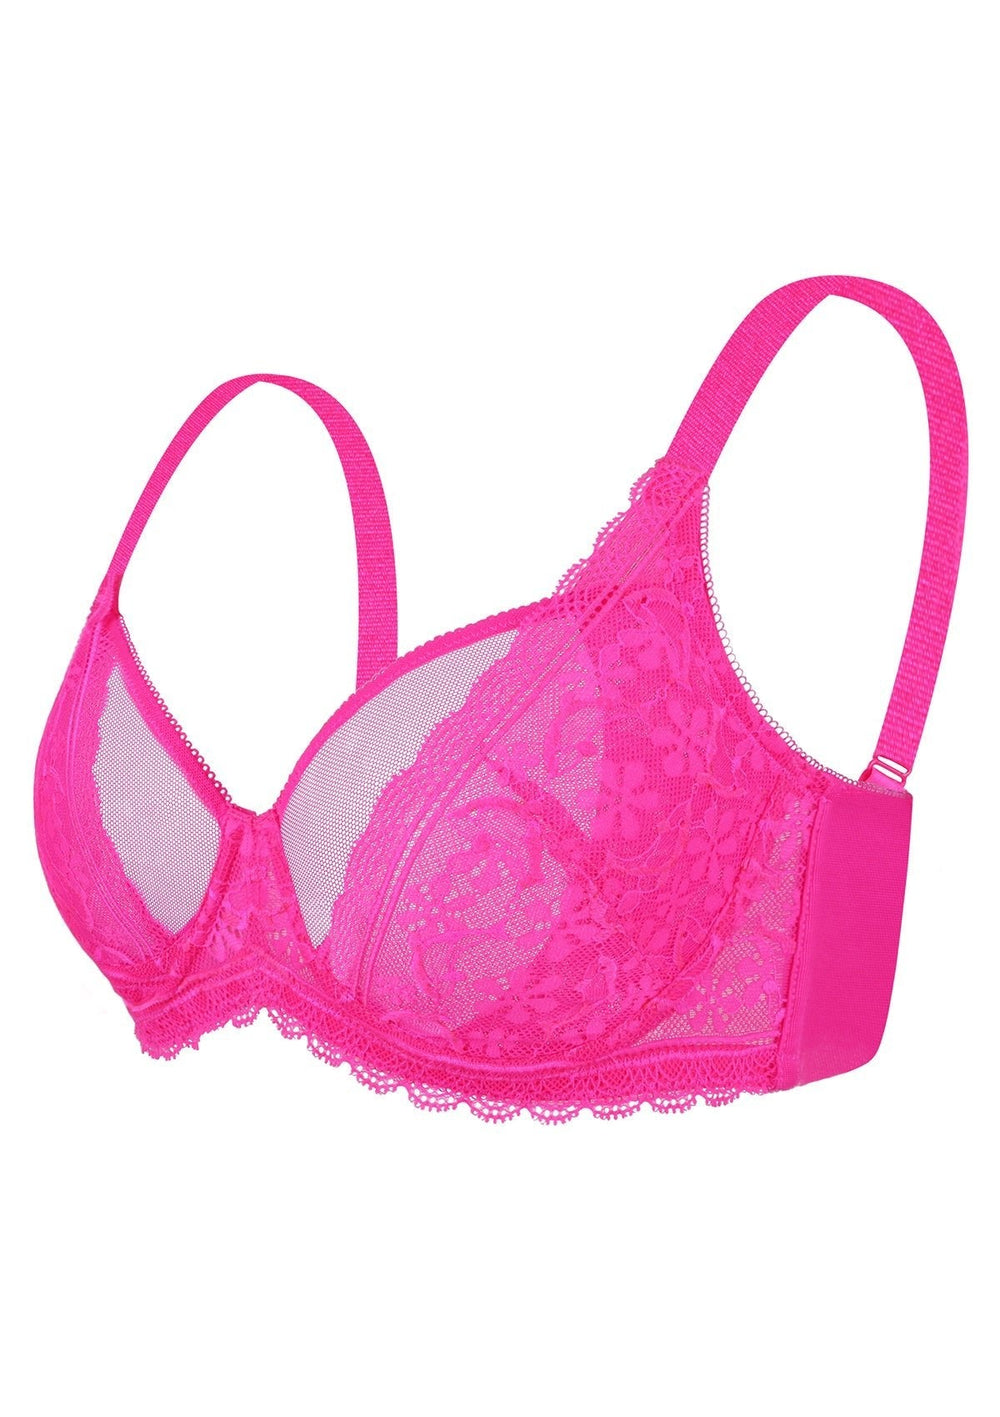 Buy Nessayoo Women's Bra Full Cup Lace Sleeping Bras 40D 42D 44D E Plus  Size Bra for Intimates Fitness Padded Bra Soutien Shrimp Pink Cup Size C  Bands Size 35 85 at